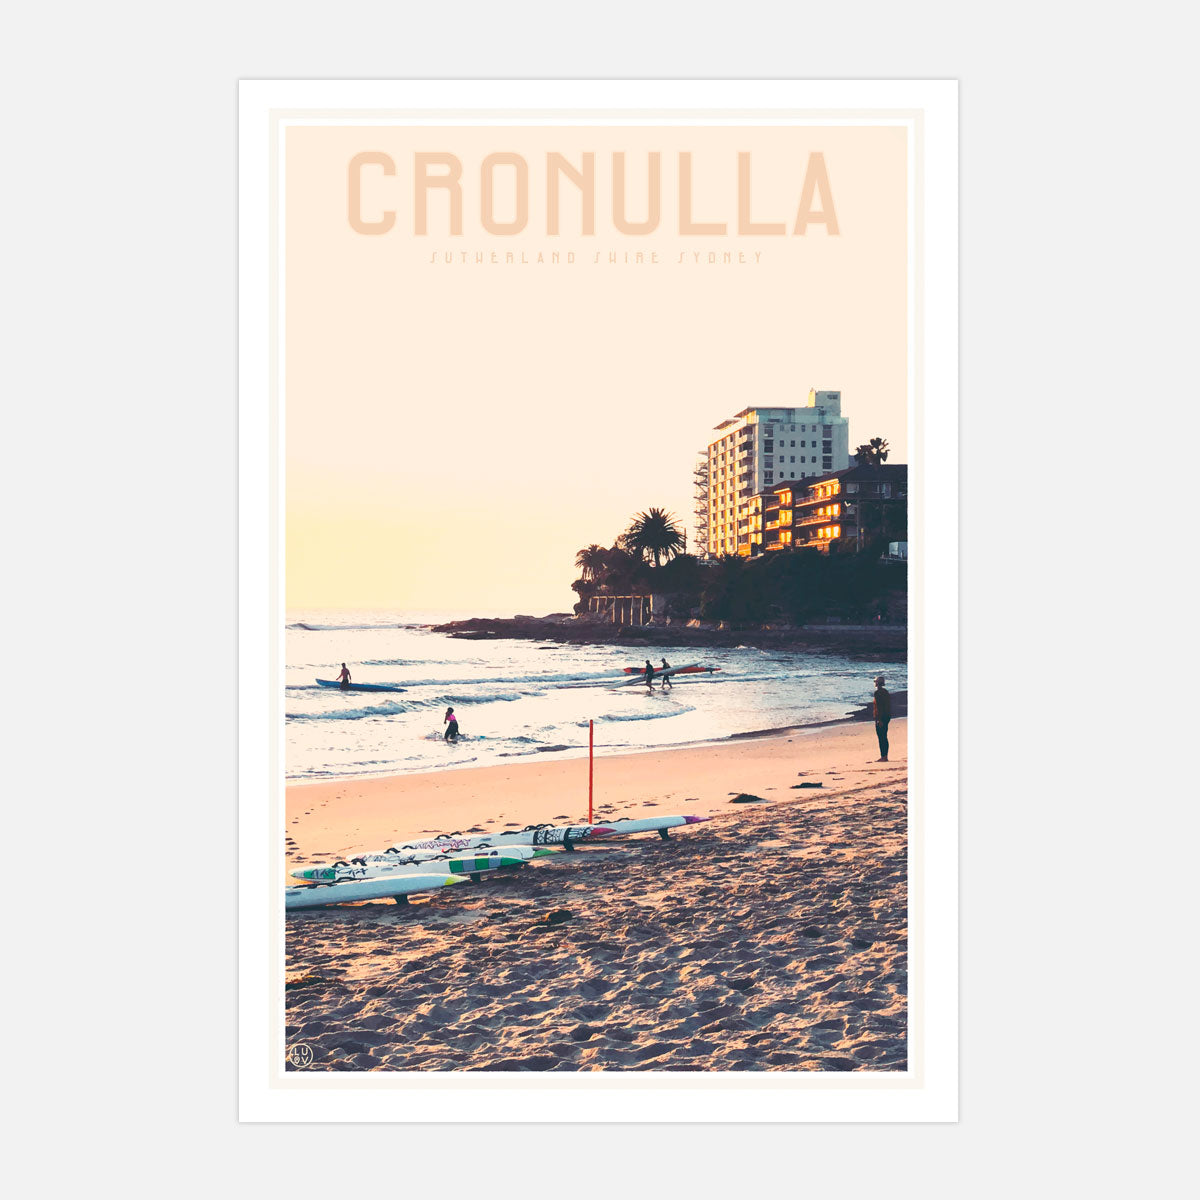 Cronulla Beach vintage style travel print, designed by places we luv